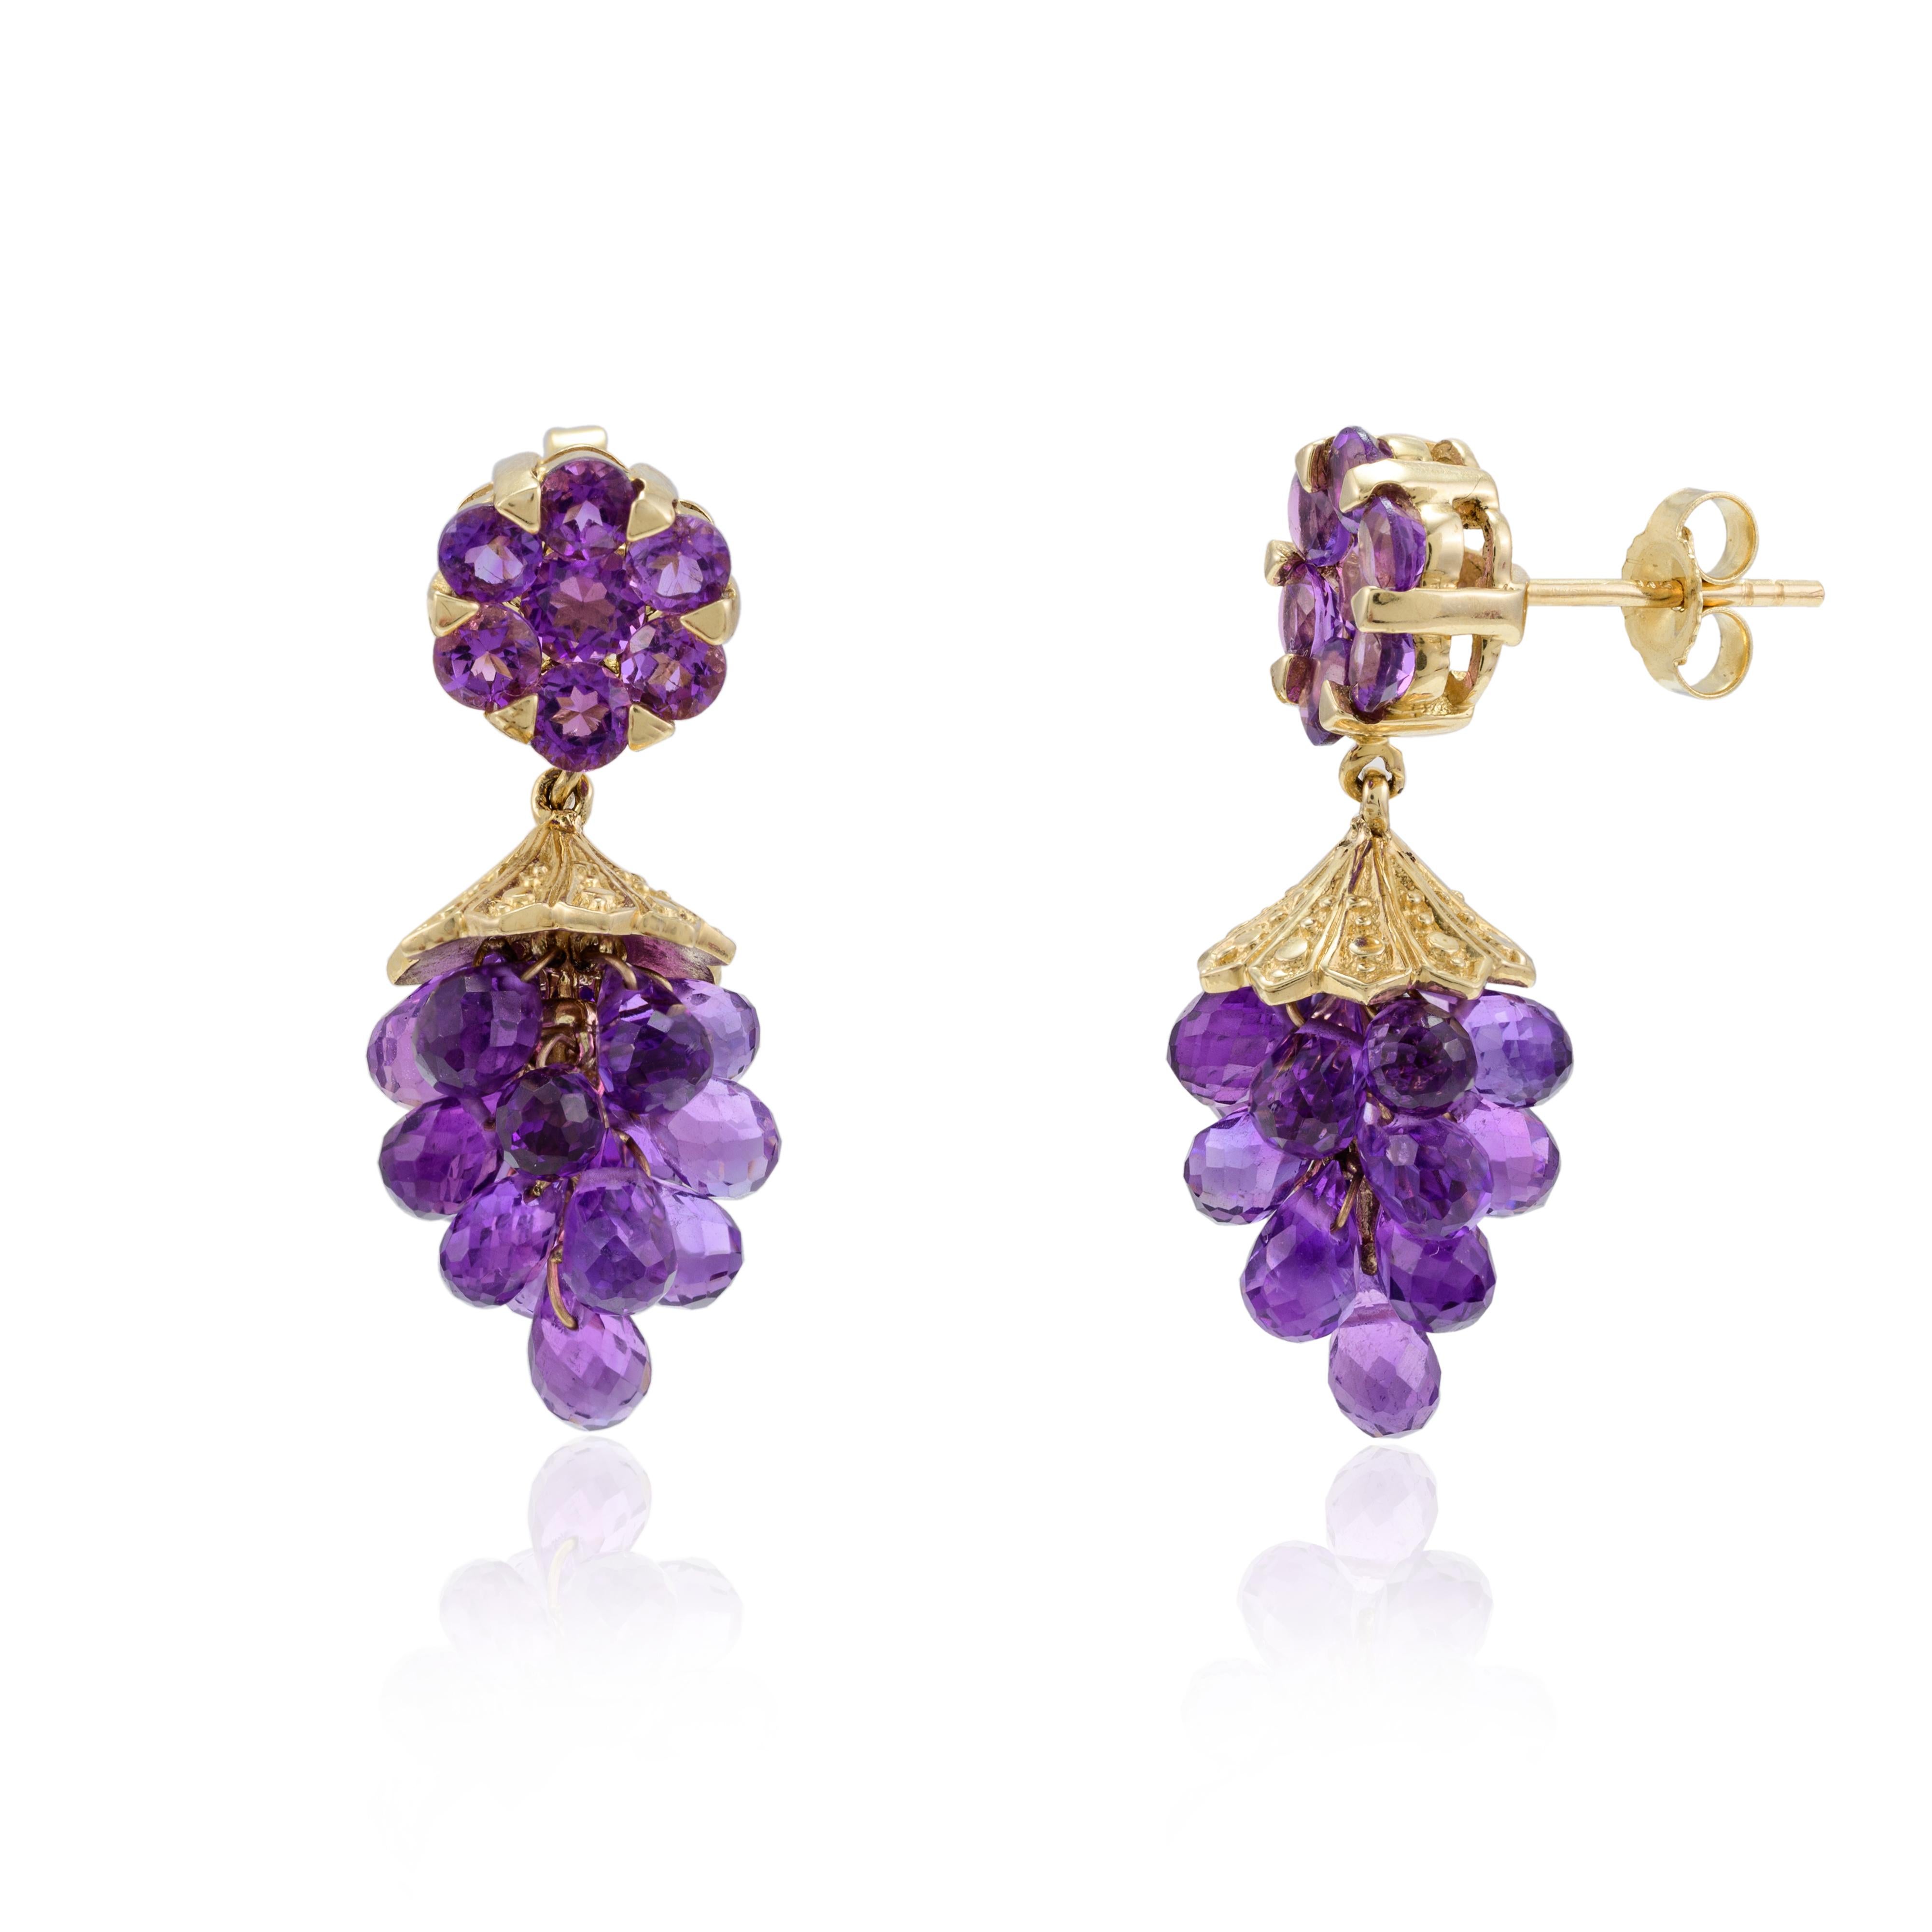 Modern 14.18 Carats Amethyst Gemstone Grapes Dangle Earrings 14k Solid Yellow Gold For Sale